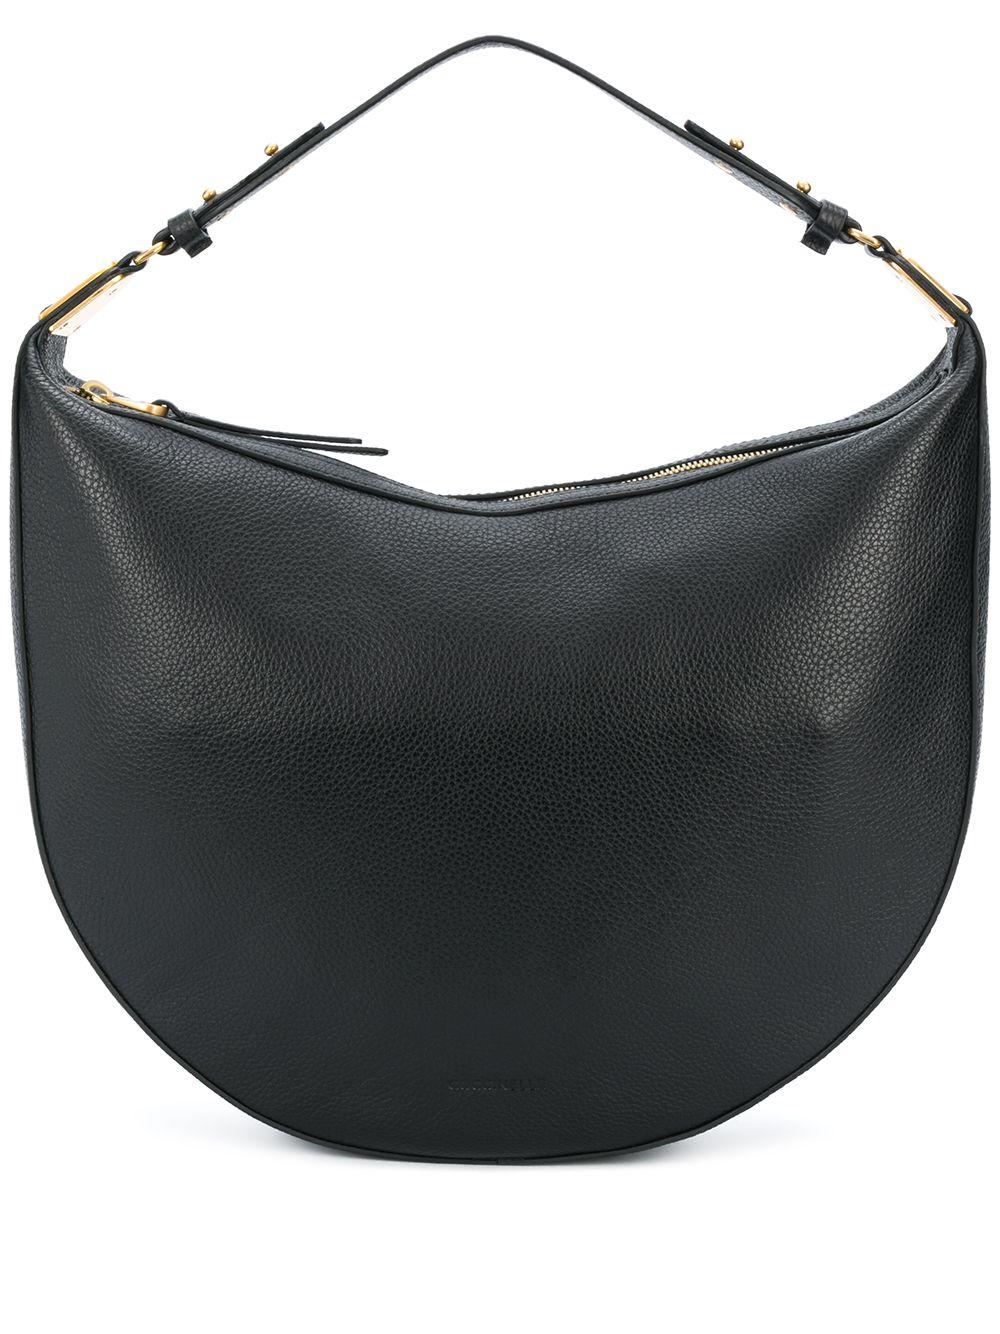 Coccinelle Rounded Leather Shoulder Bag in Black - Save 3% - Lyst